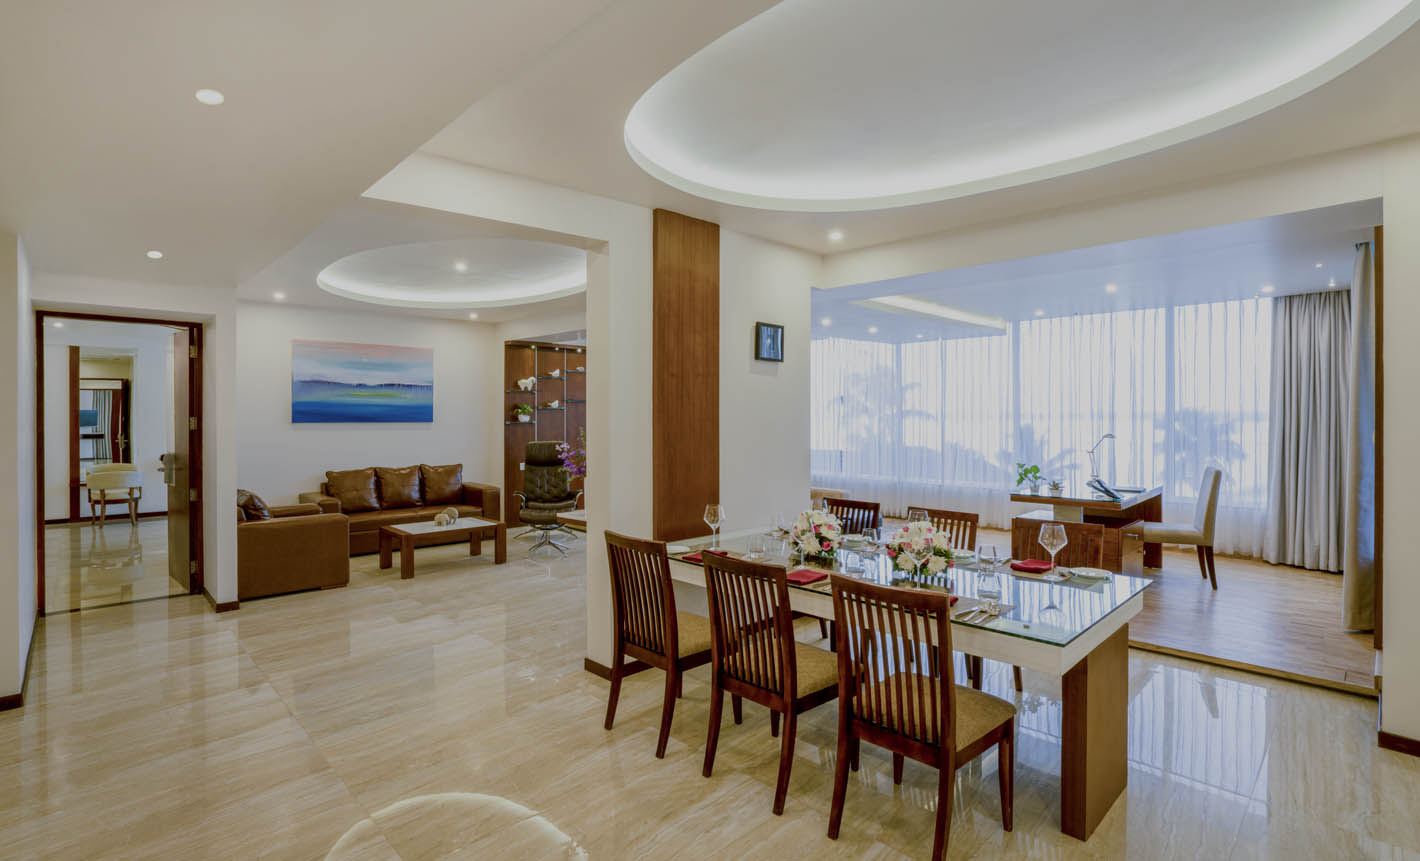 Ramada is a luxury backwater resort in kochi, which offers an uplifting blend of unique hospitality and bespoke wellness. Book our luxury lake view resort Now! | Best Presidential Suit in Kochi, Kerala, Cochin